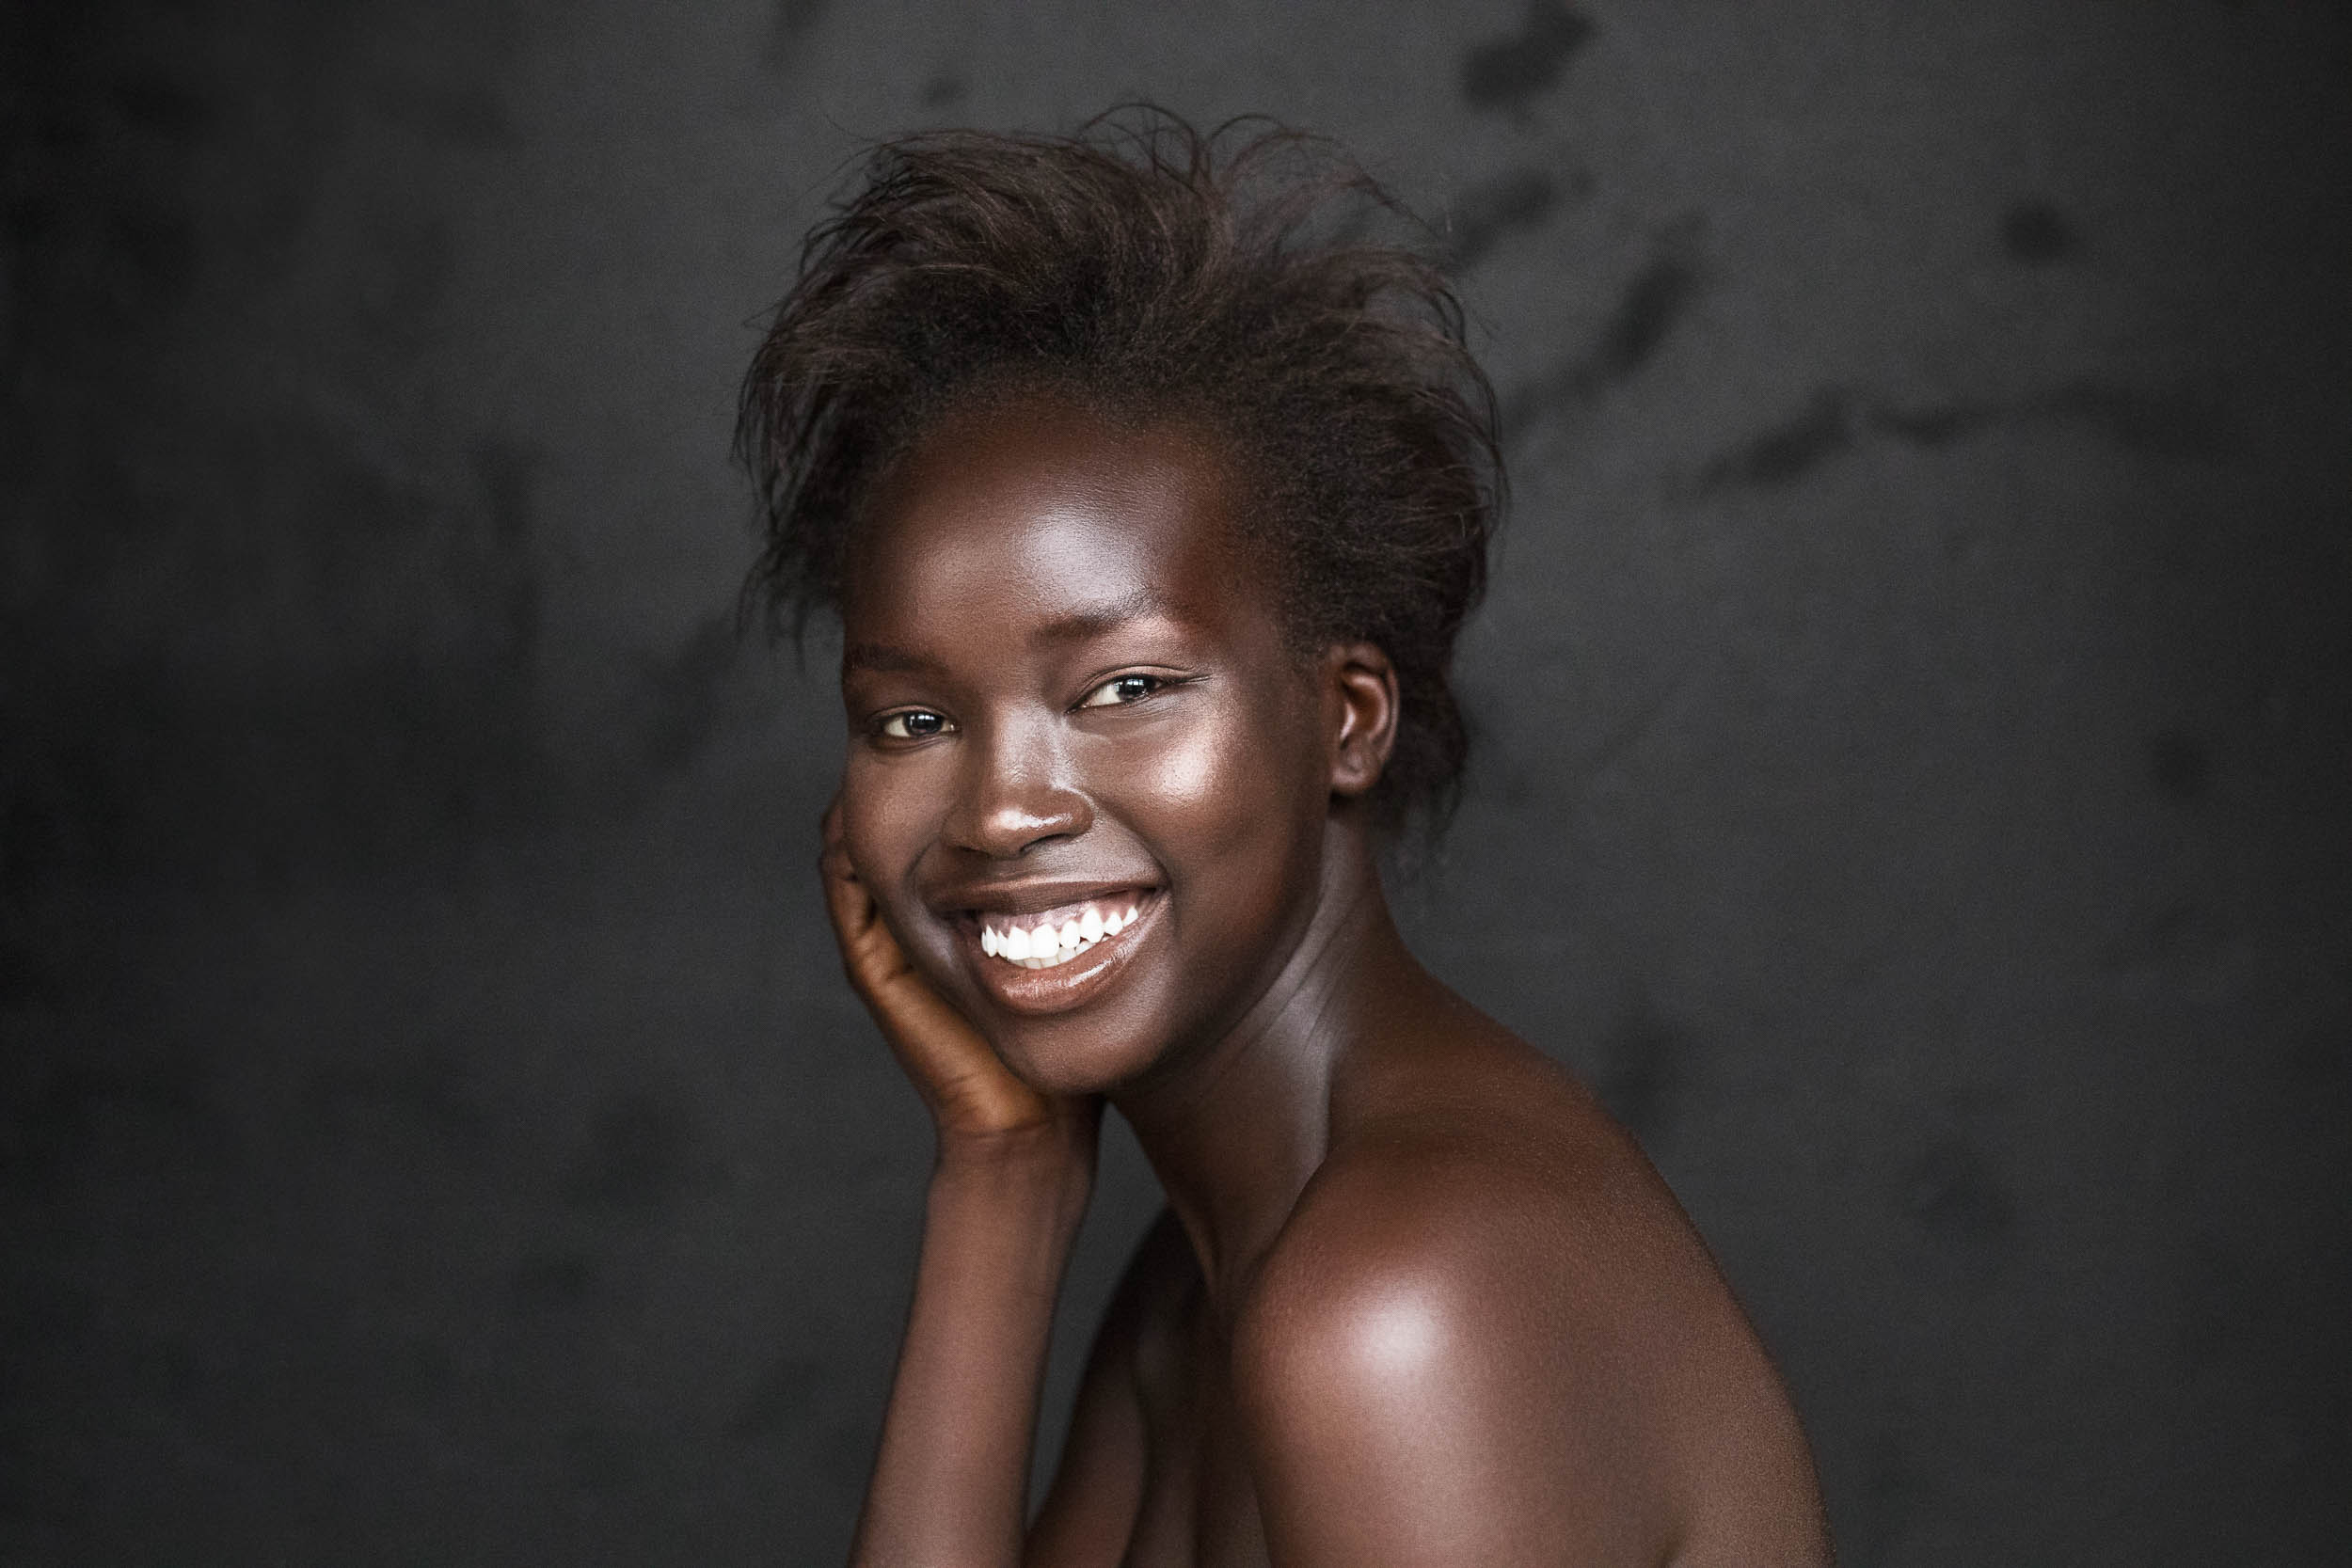 Ajok photographed in Sydney by Nick Walters2.jpg